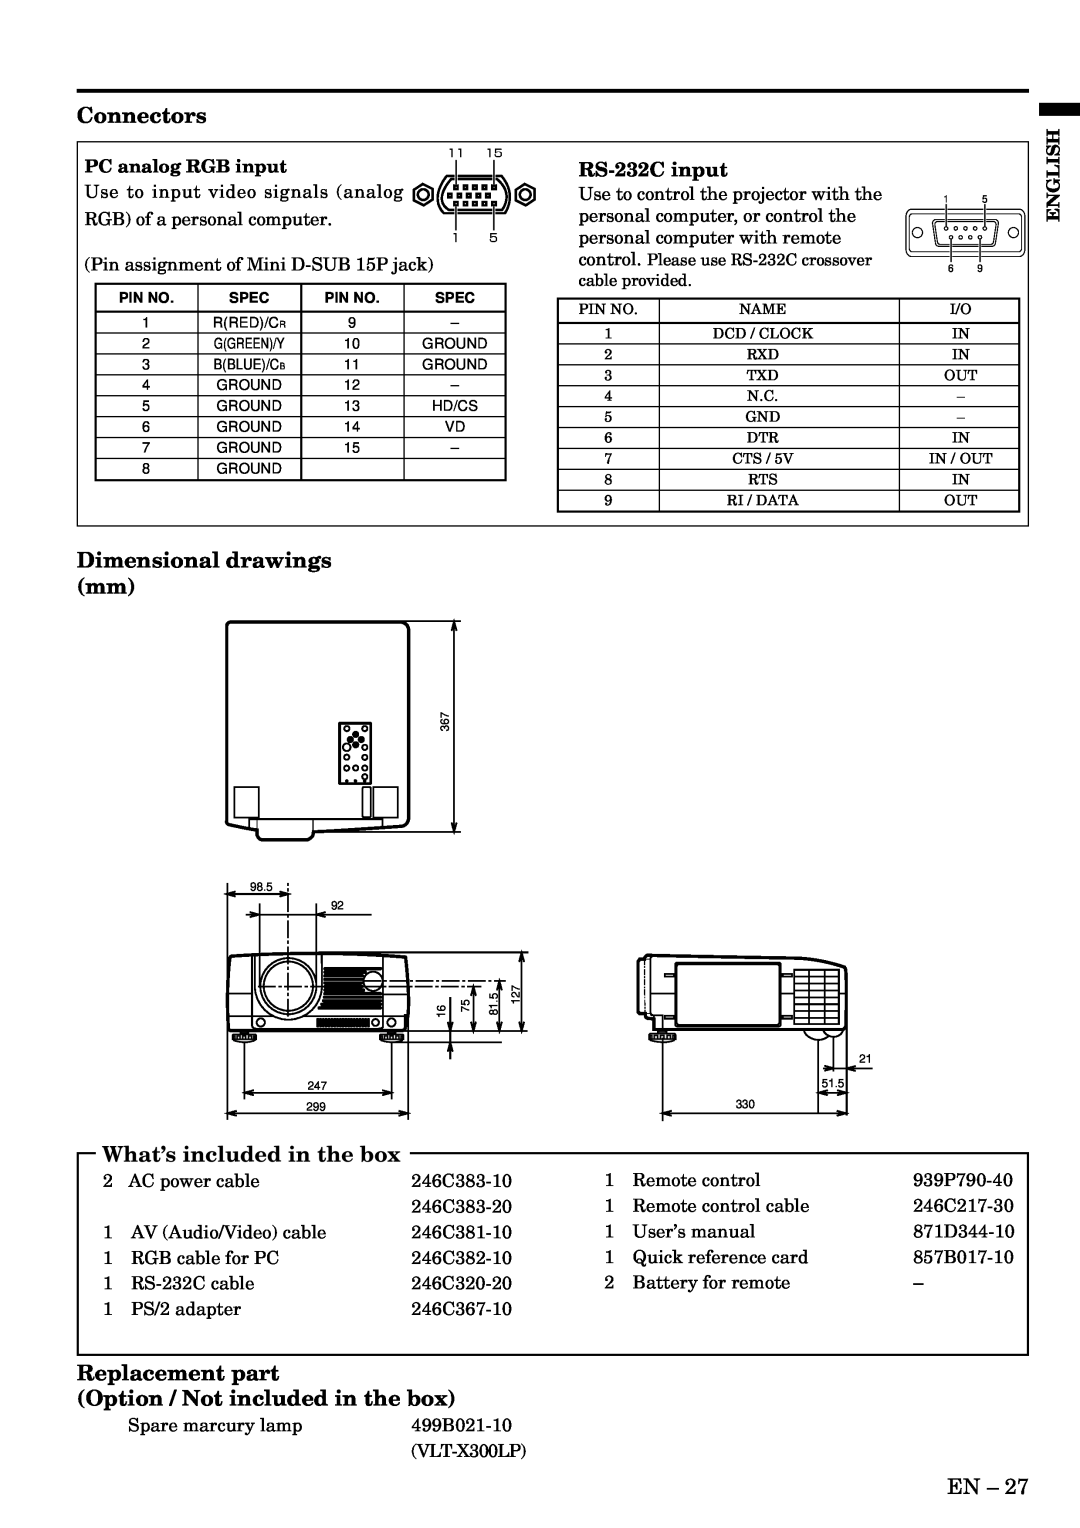 Mitsubishi Electronics S290U user manual Connectors, Dimensional drawings mm, What’s included in the box, Replacement part 